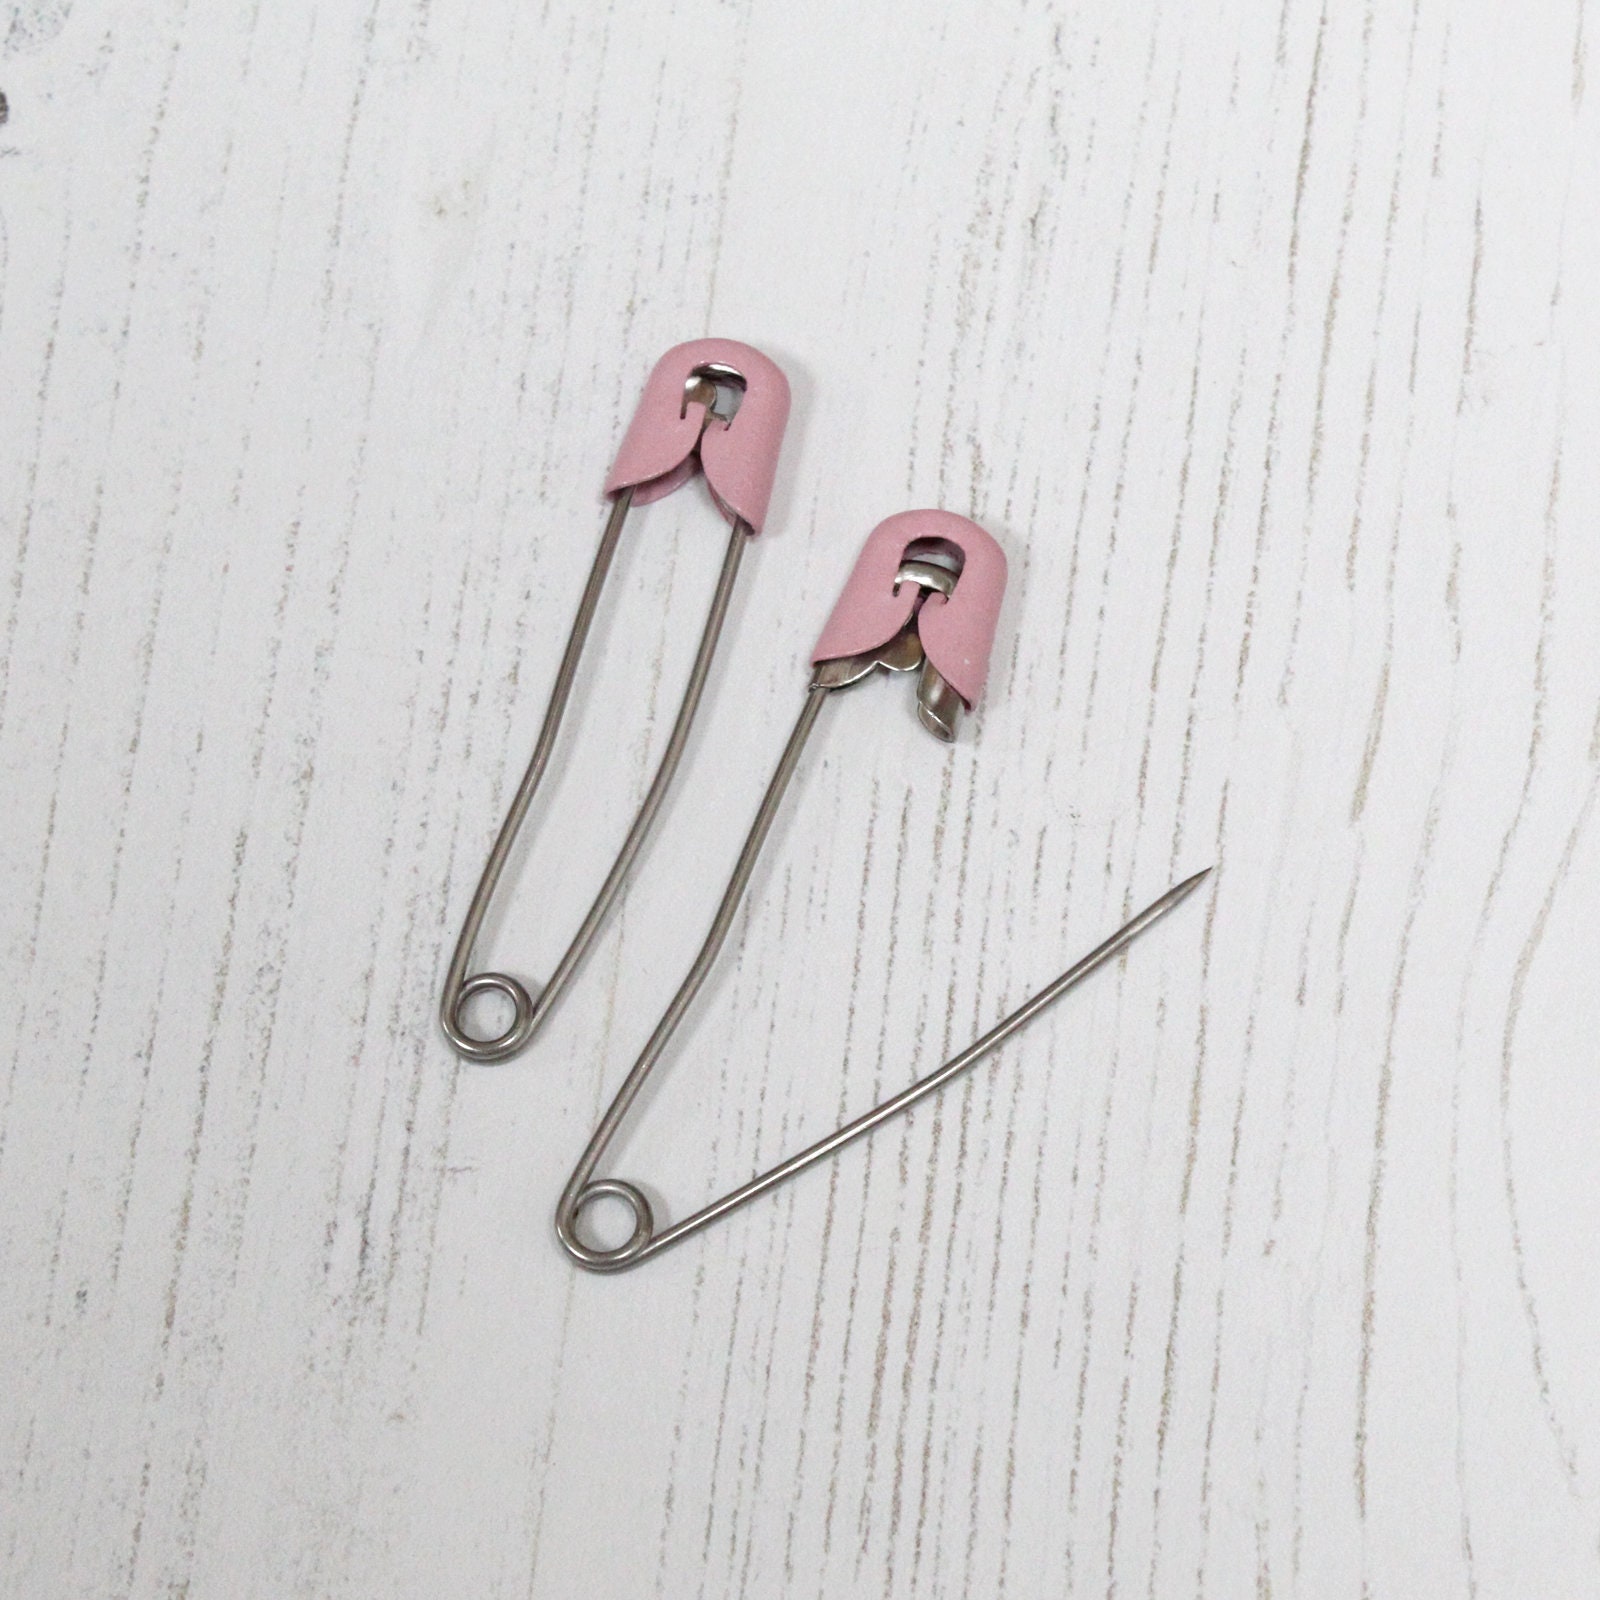 Quality Nappy Pins Baby Safety Snap Lock Metal Cap Diaper Pins in 3 Colours  